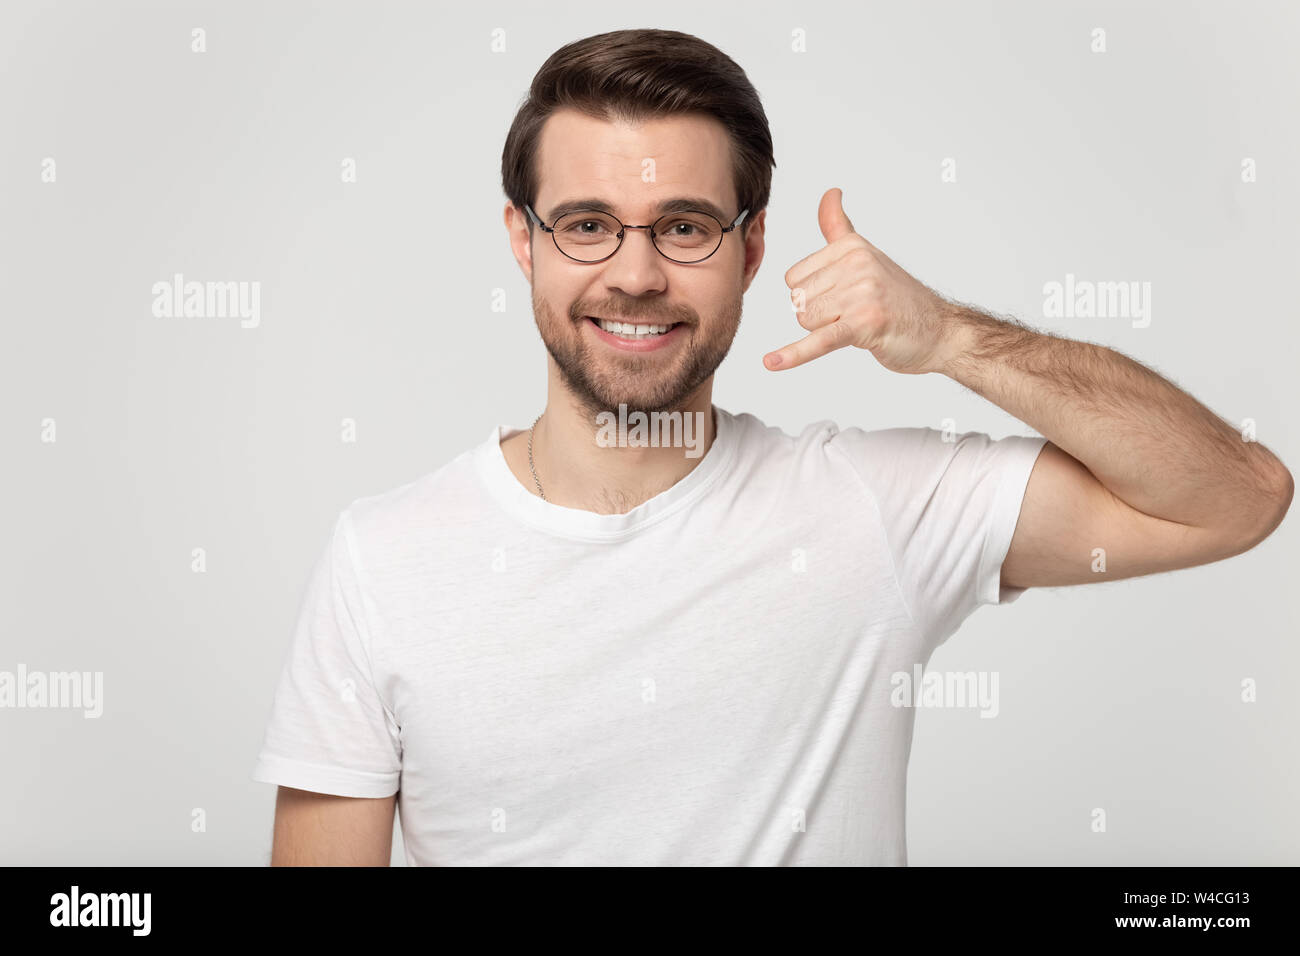 Guy showing call me back gesture with hand studio shot Stock Photo